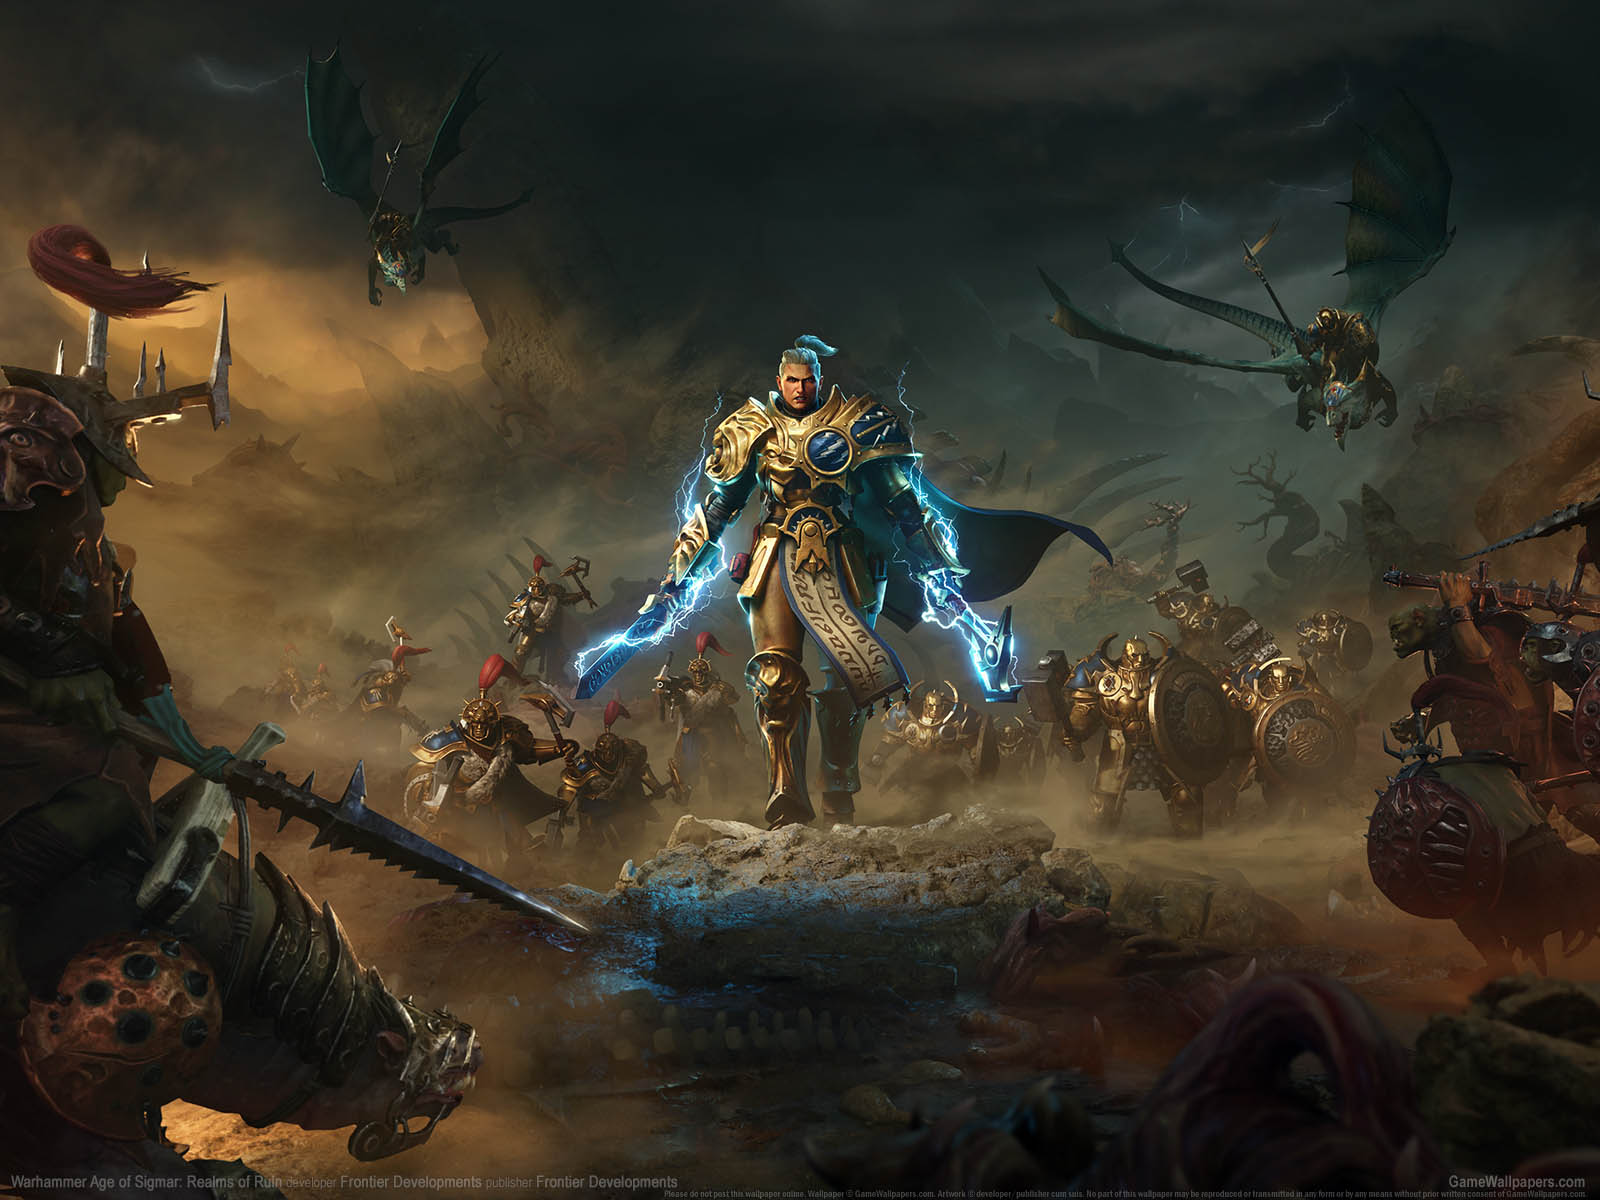 Warhammer Age of Sigmar%253A Realms of Ruin wallpaper 01 1600x1200